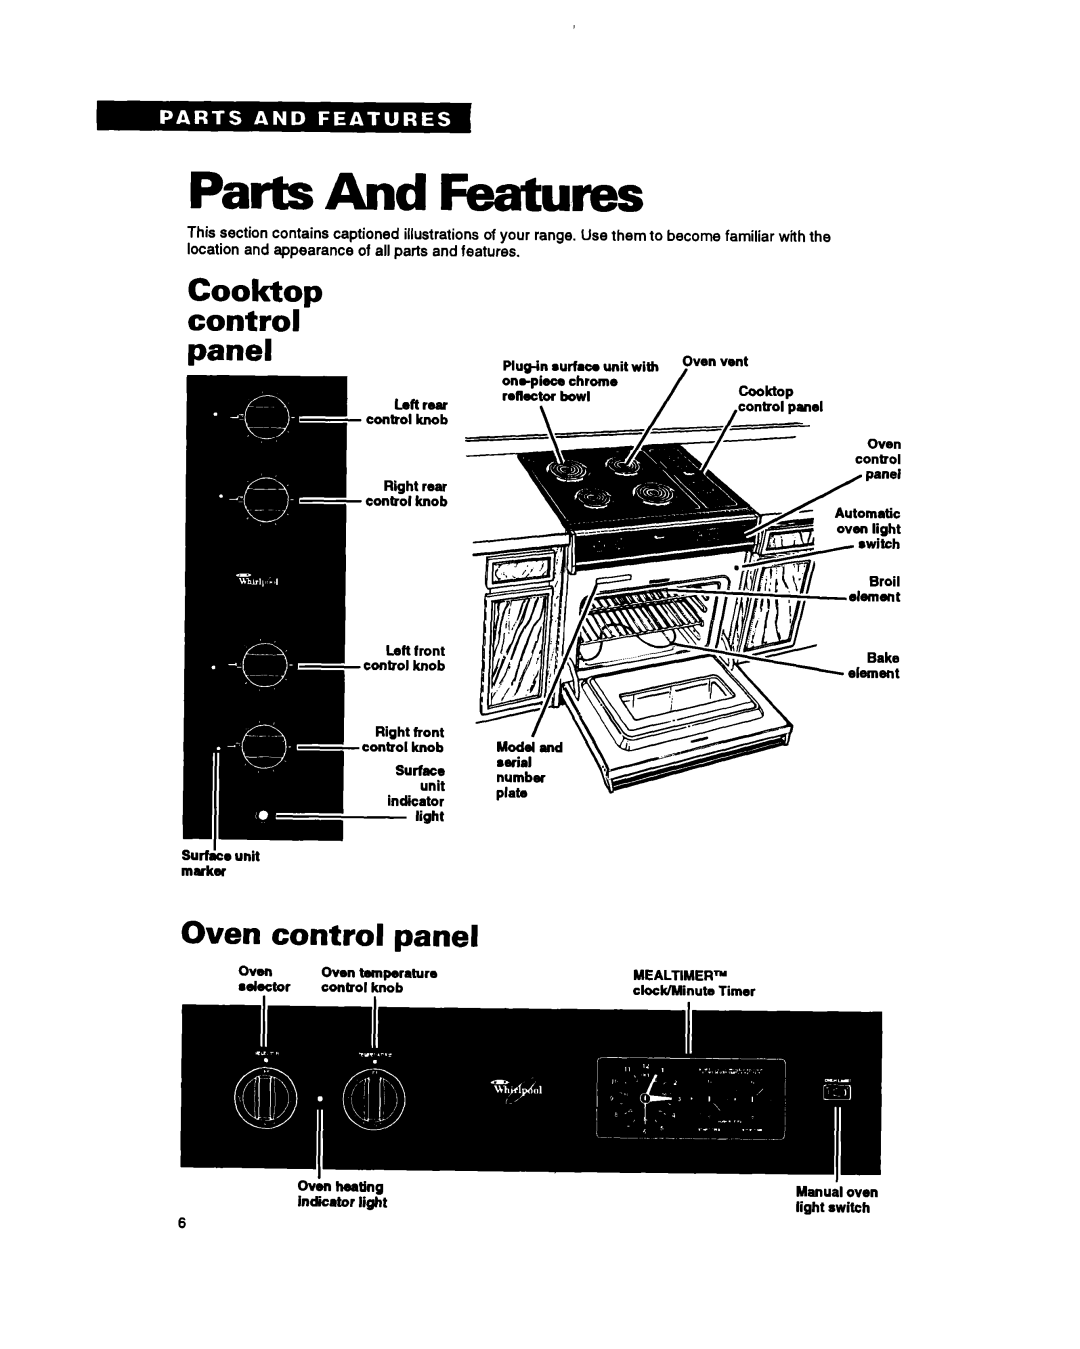 Whirlpool RS6105XB warranty Parts And Features, Oven control, oven Oven, cooktop control panel 